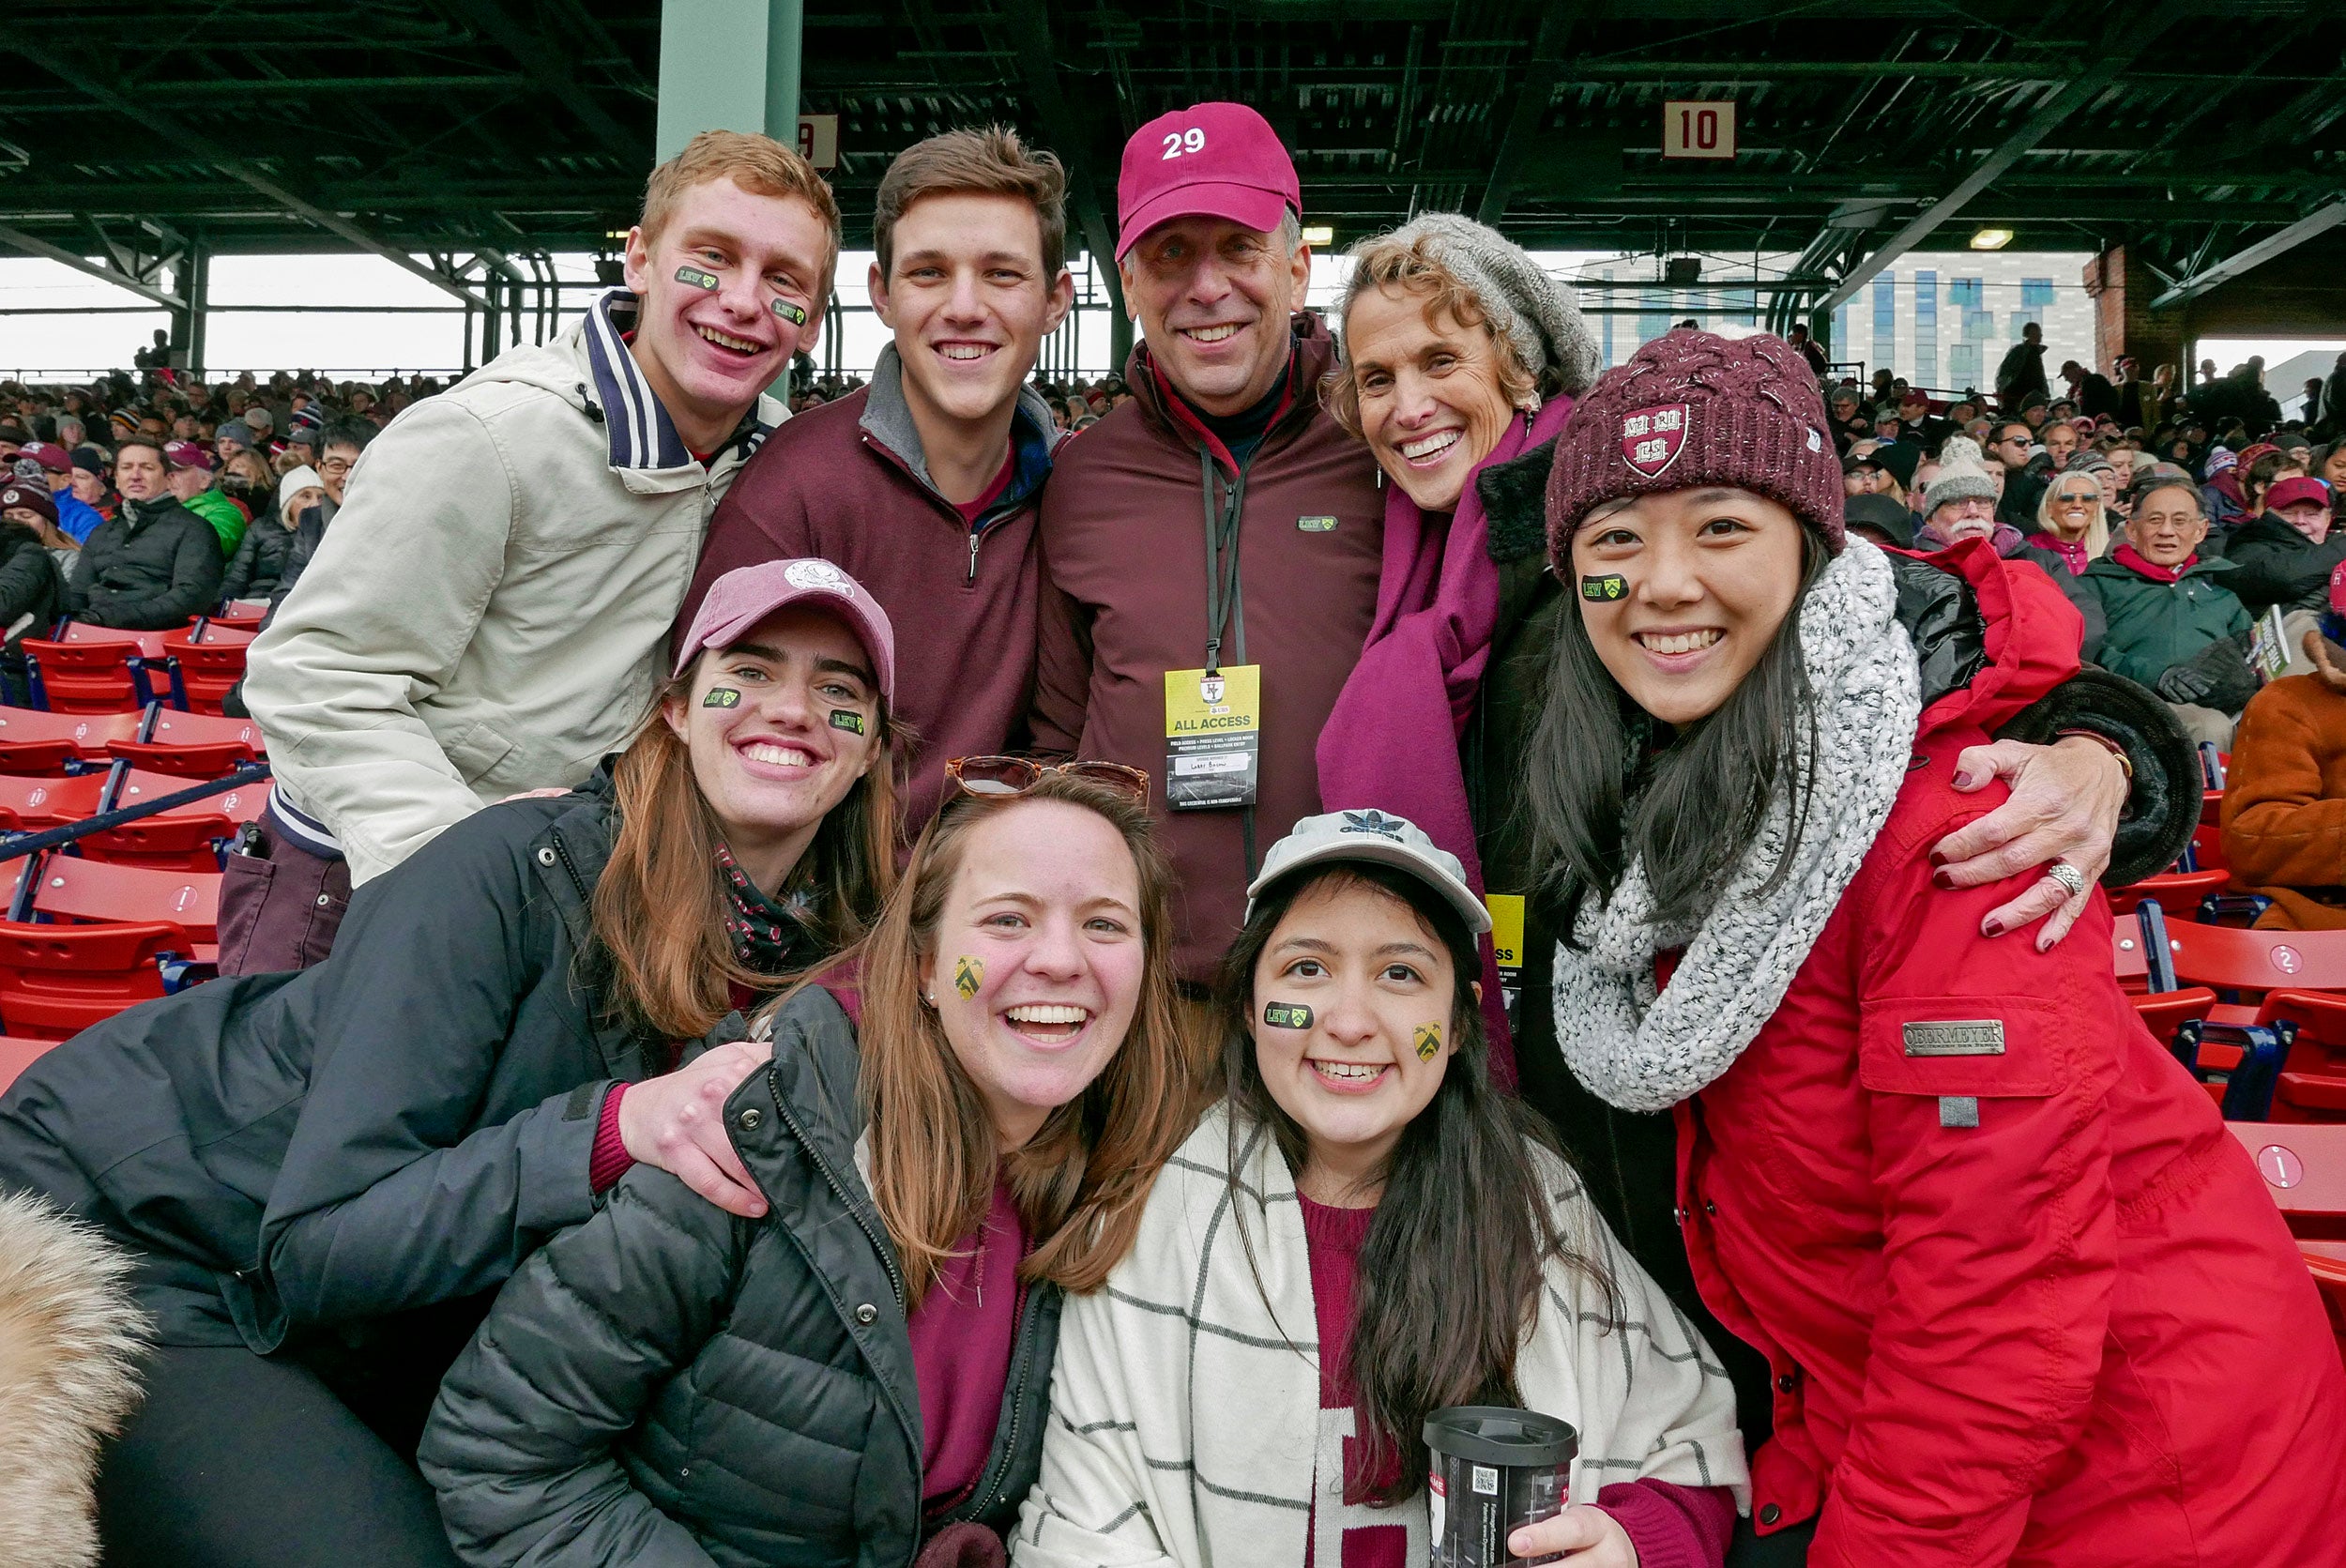 Larry and Adele Bacow celebrate with fans at the Harvard-Yale football game at Fenway Park.